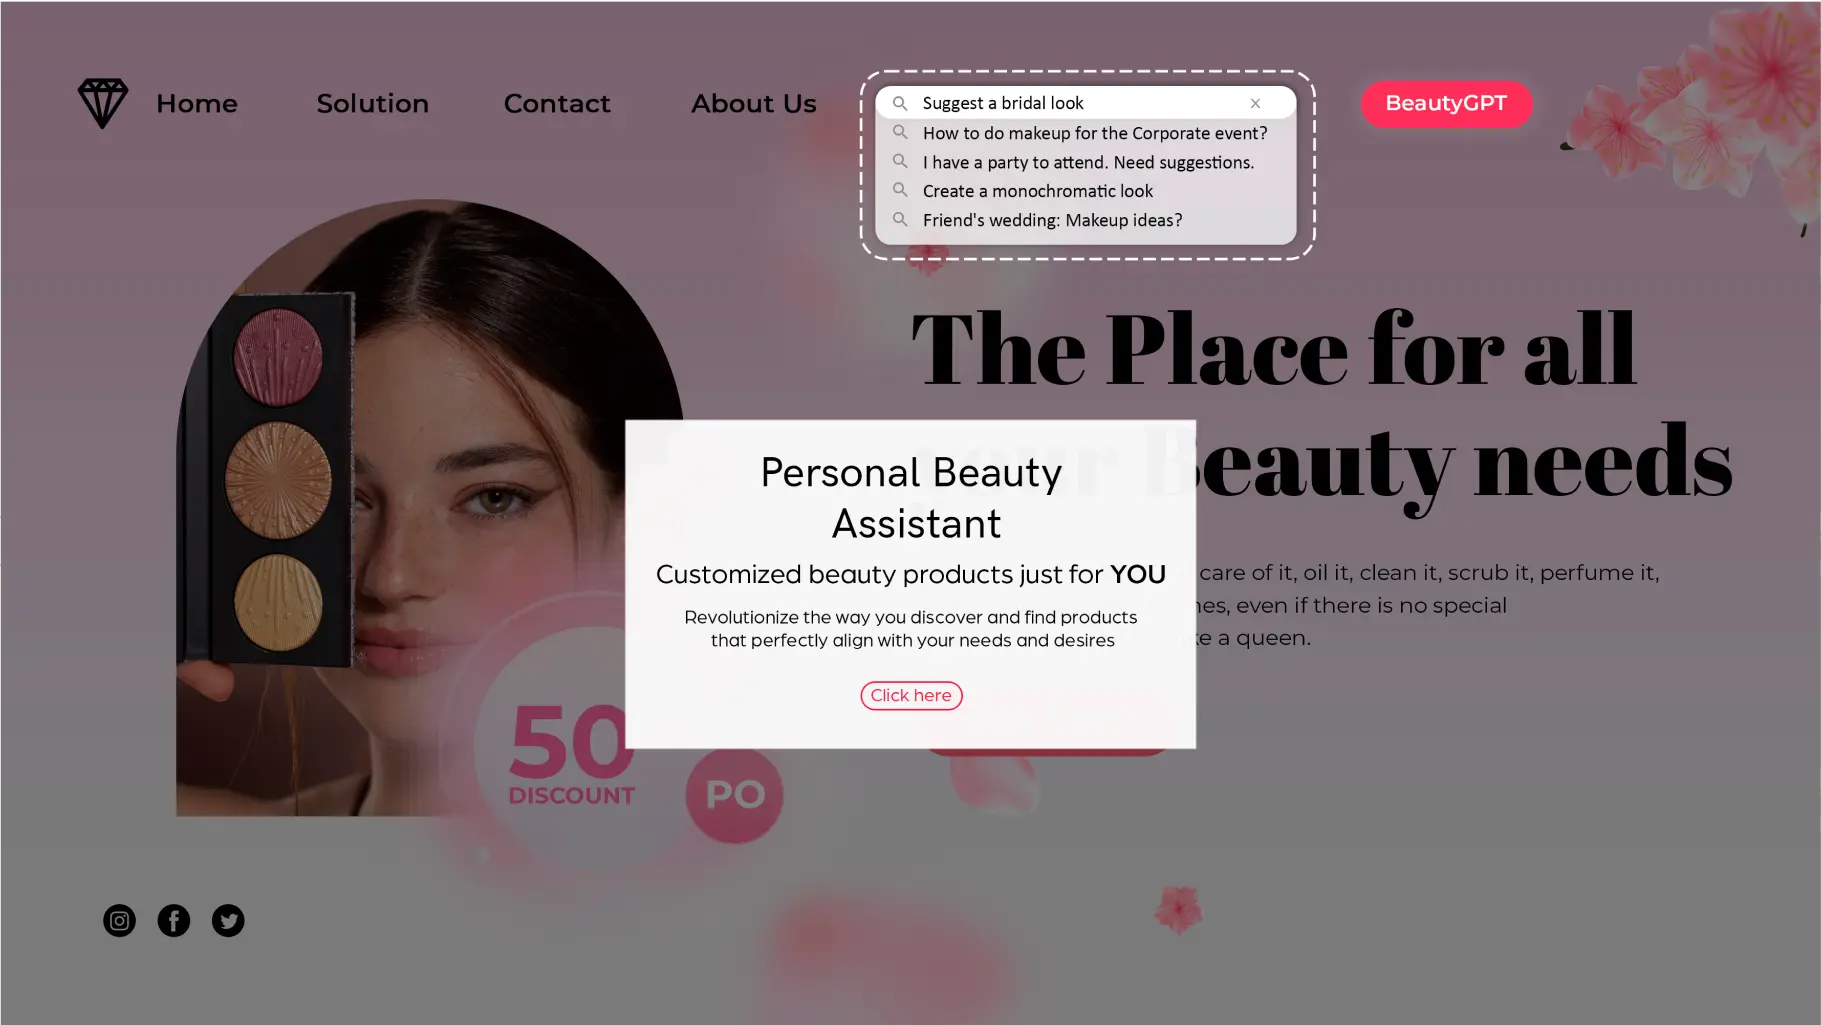 The homepage of an E-commerce beauty brand’s website which has integrated BeautyGPT in their search bar